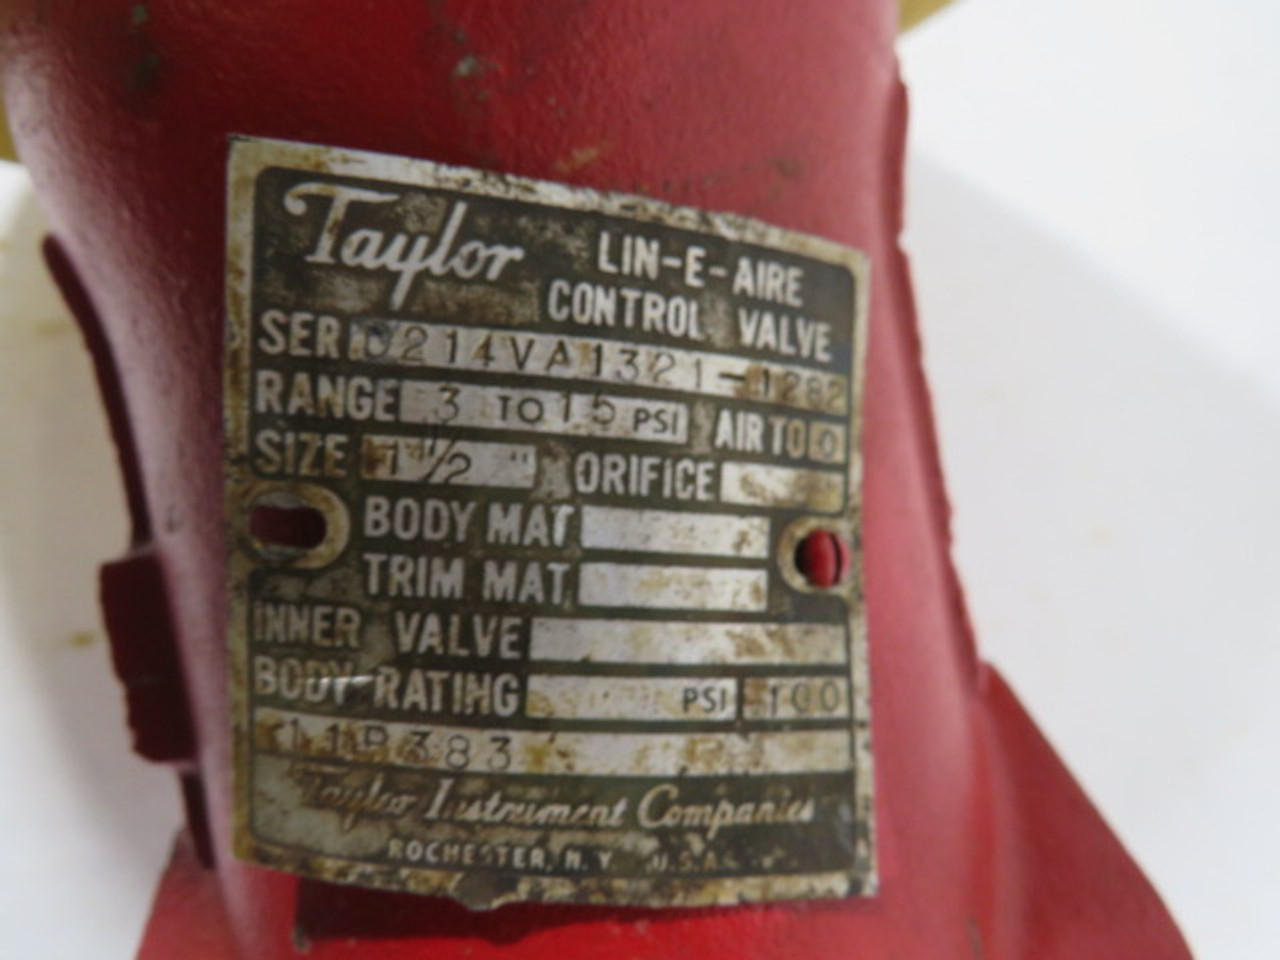 Taylor 1-1/2" Lin-E-Aire High Flow Iron Control Valve 1-1/2" 3-15PSI USED